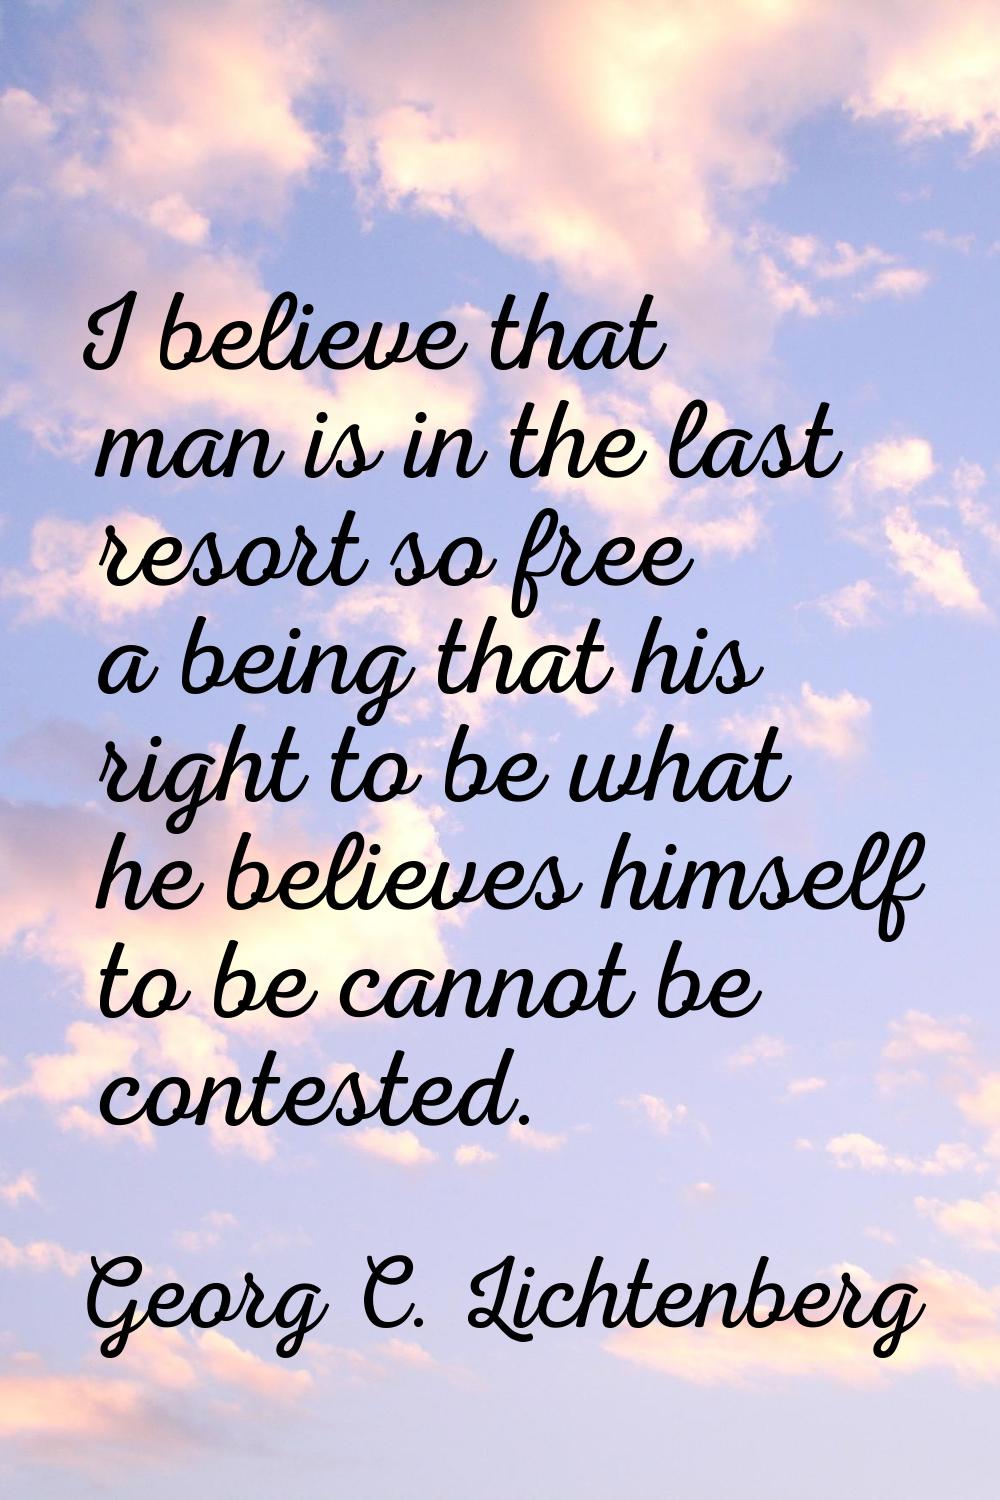 I believe that man is in the last resort so free a being that his right to be what he believes hims